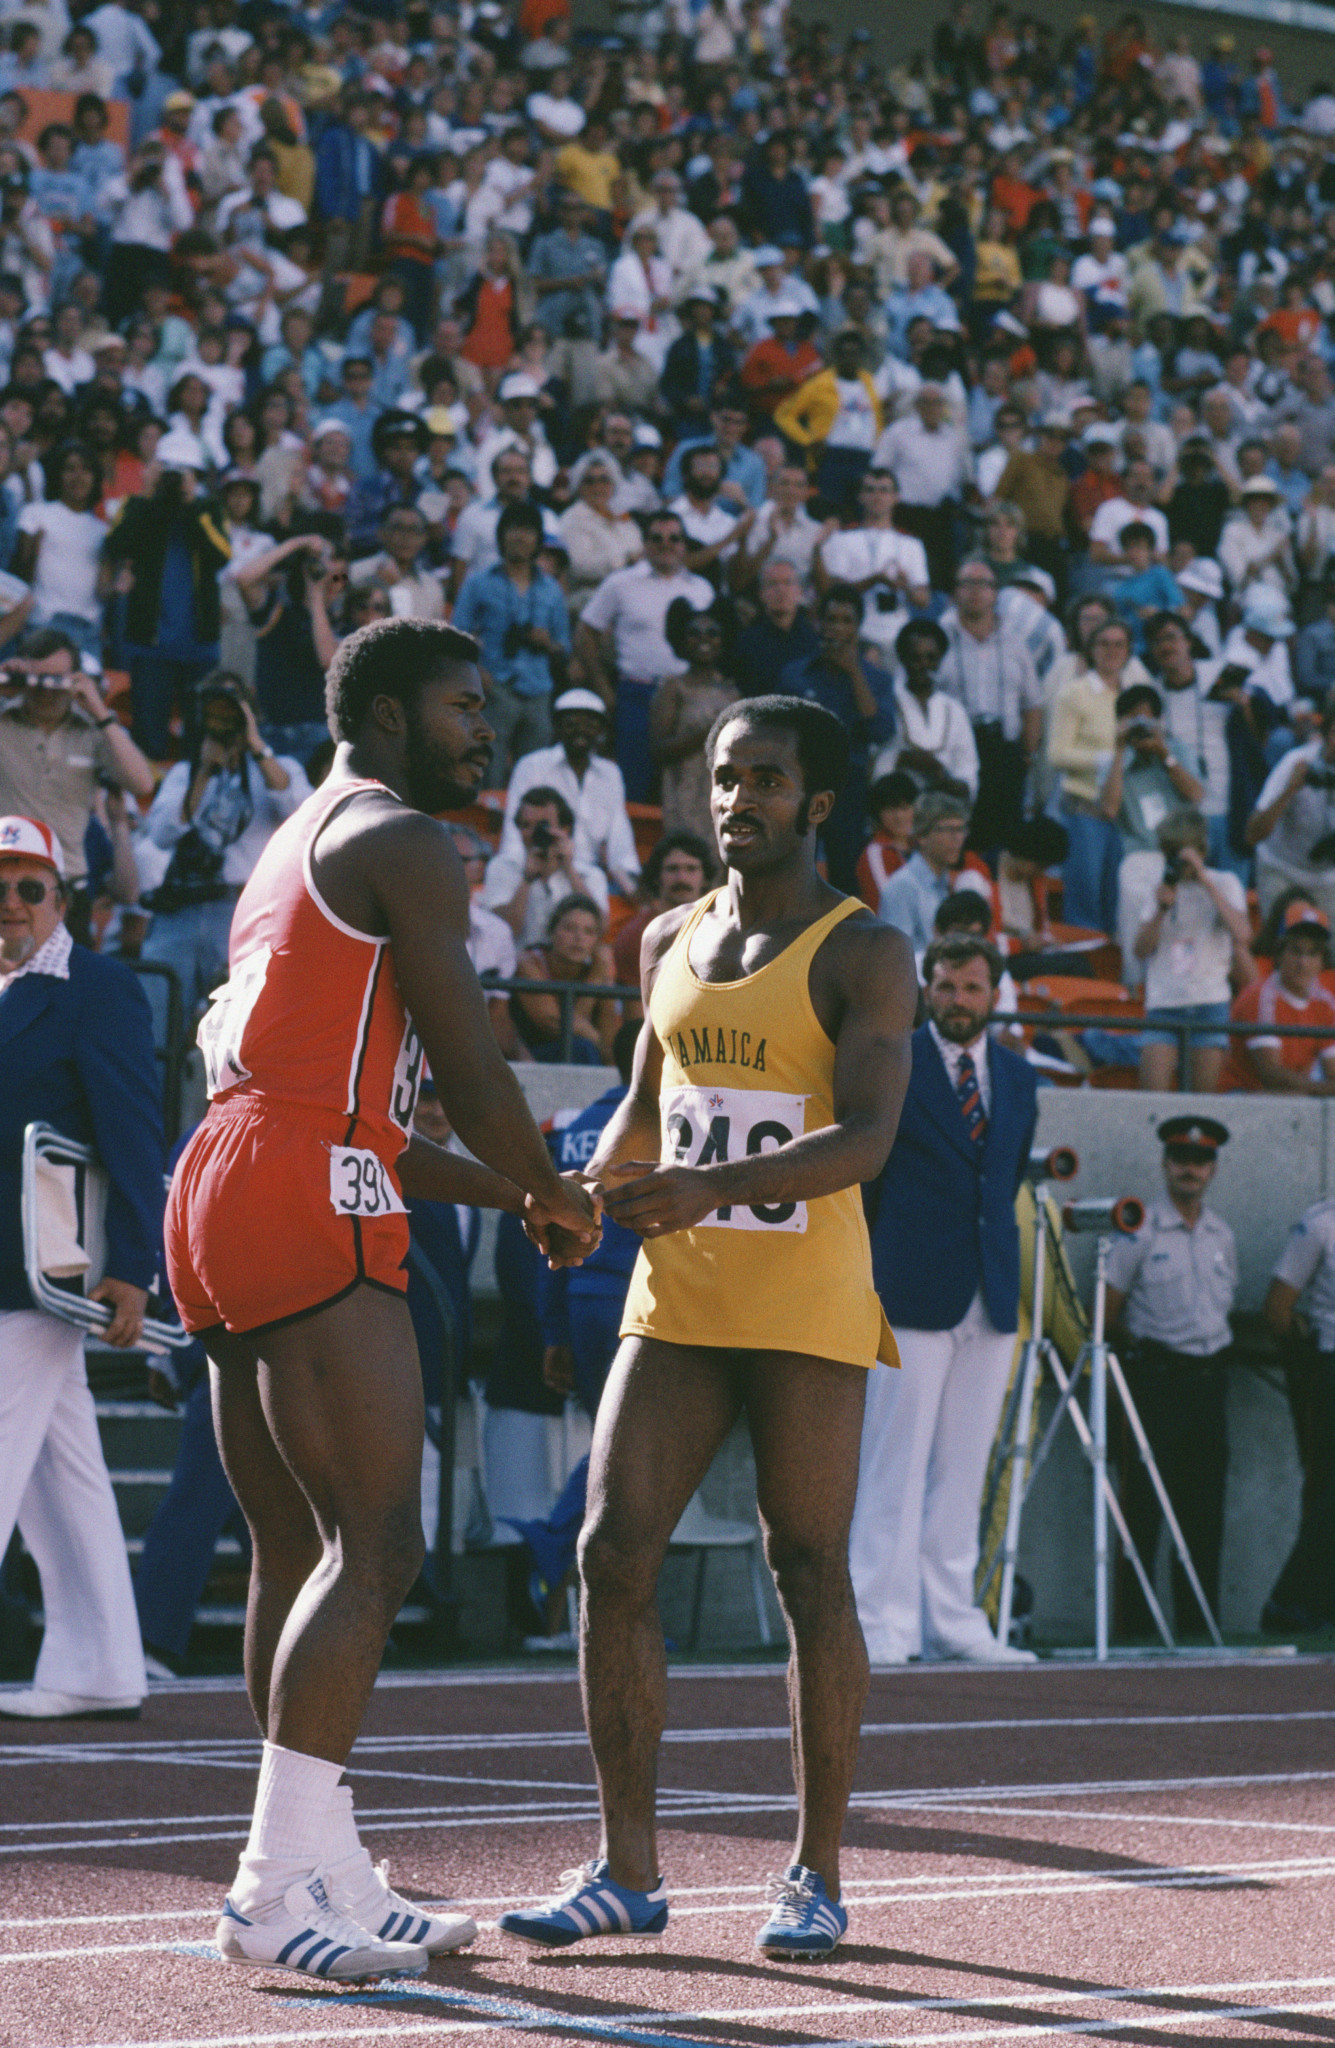 Bronze medal winner Hasely Crawford of Trinidad and Tobago congratulates Jamaican athlete Don Quarrie, right, on winning the gold in the 100 Metres at the Commonwealth Games in Edmonton, Canada, in August 1978. Allan Wells, of Scotland, finished second ©Getty Images